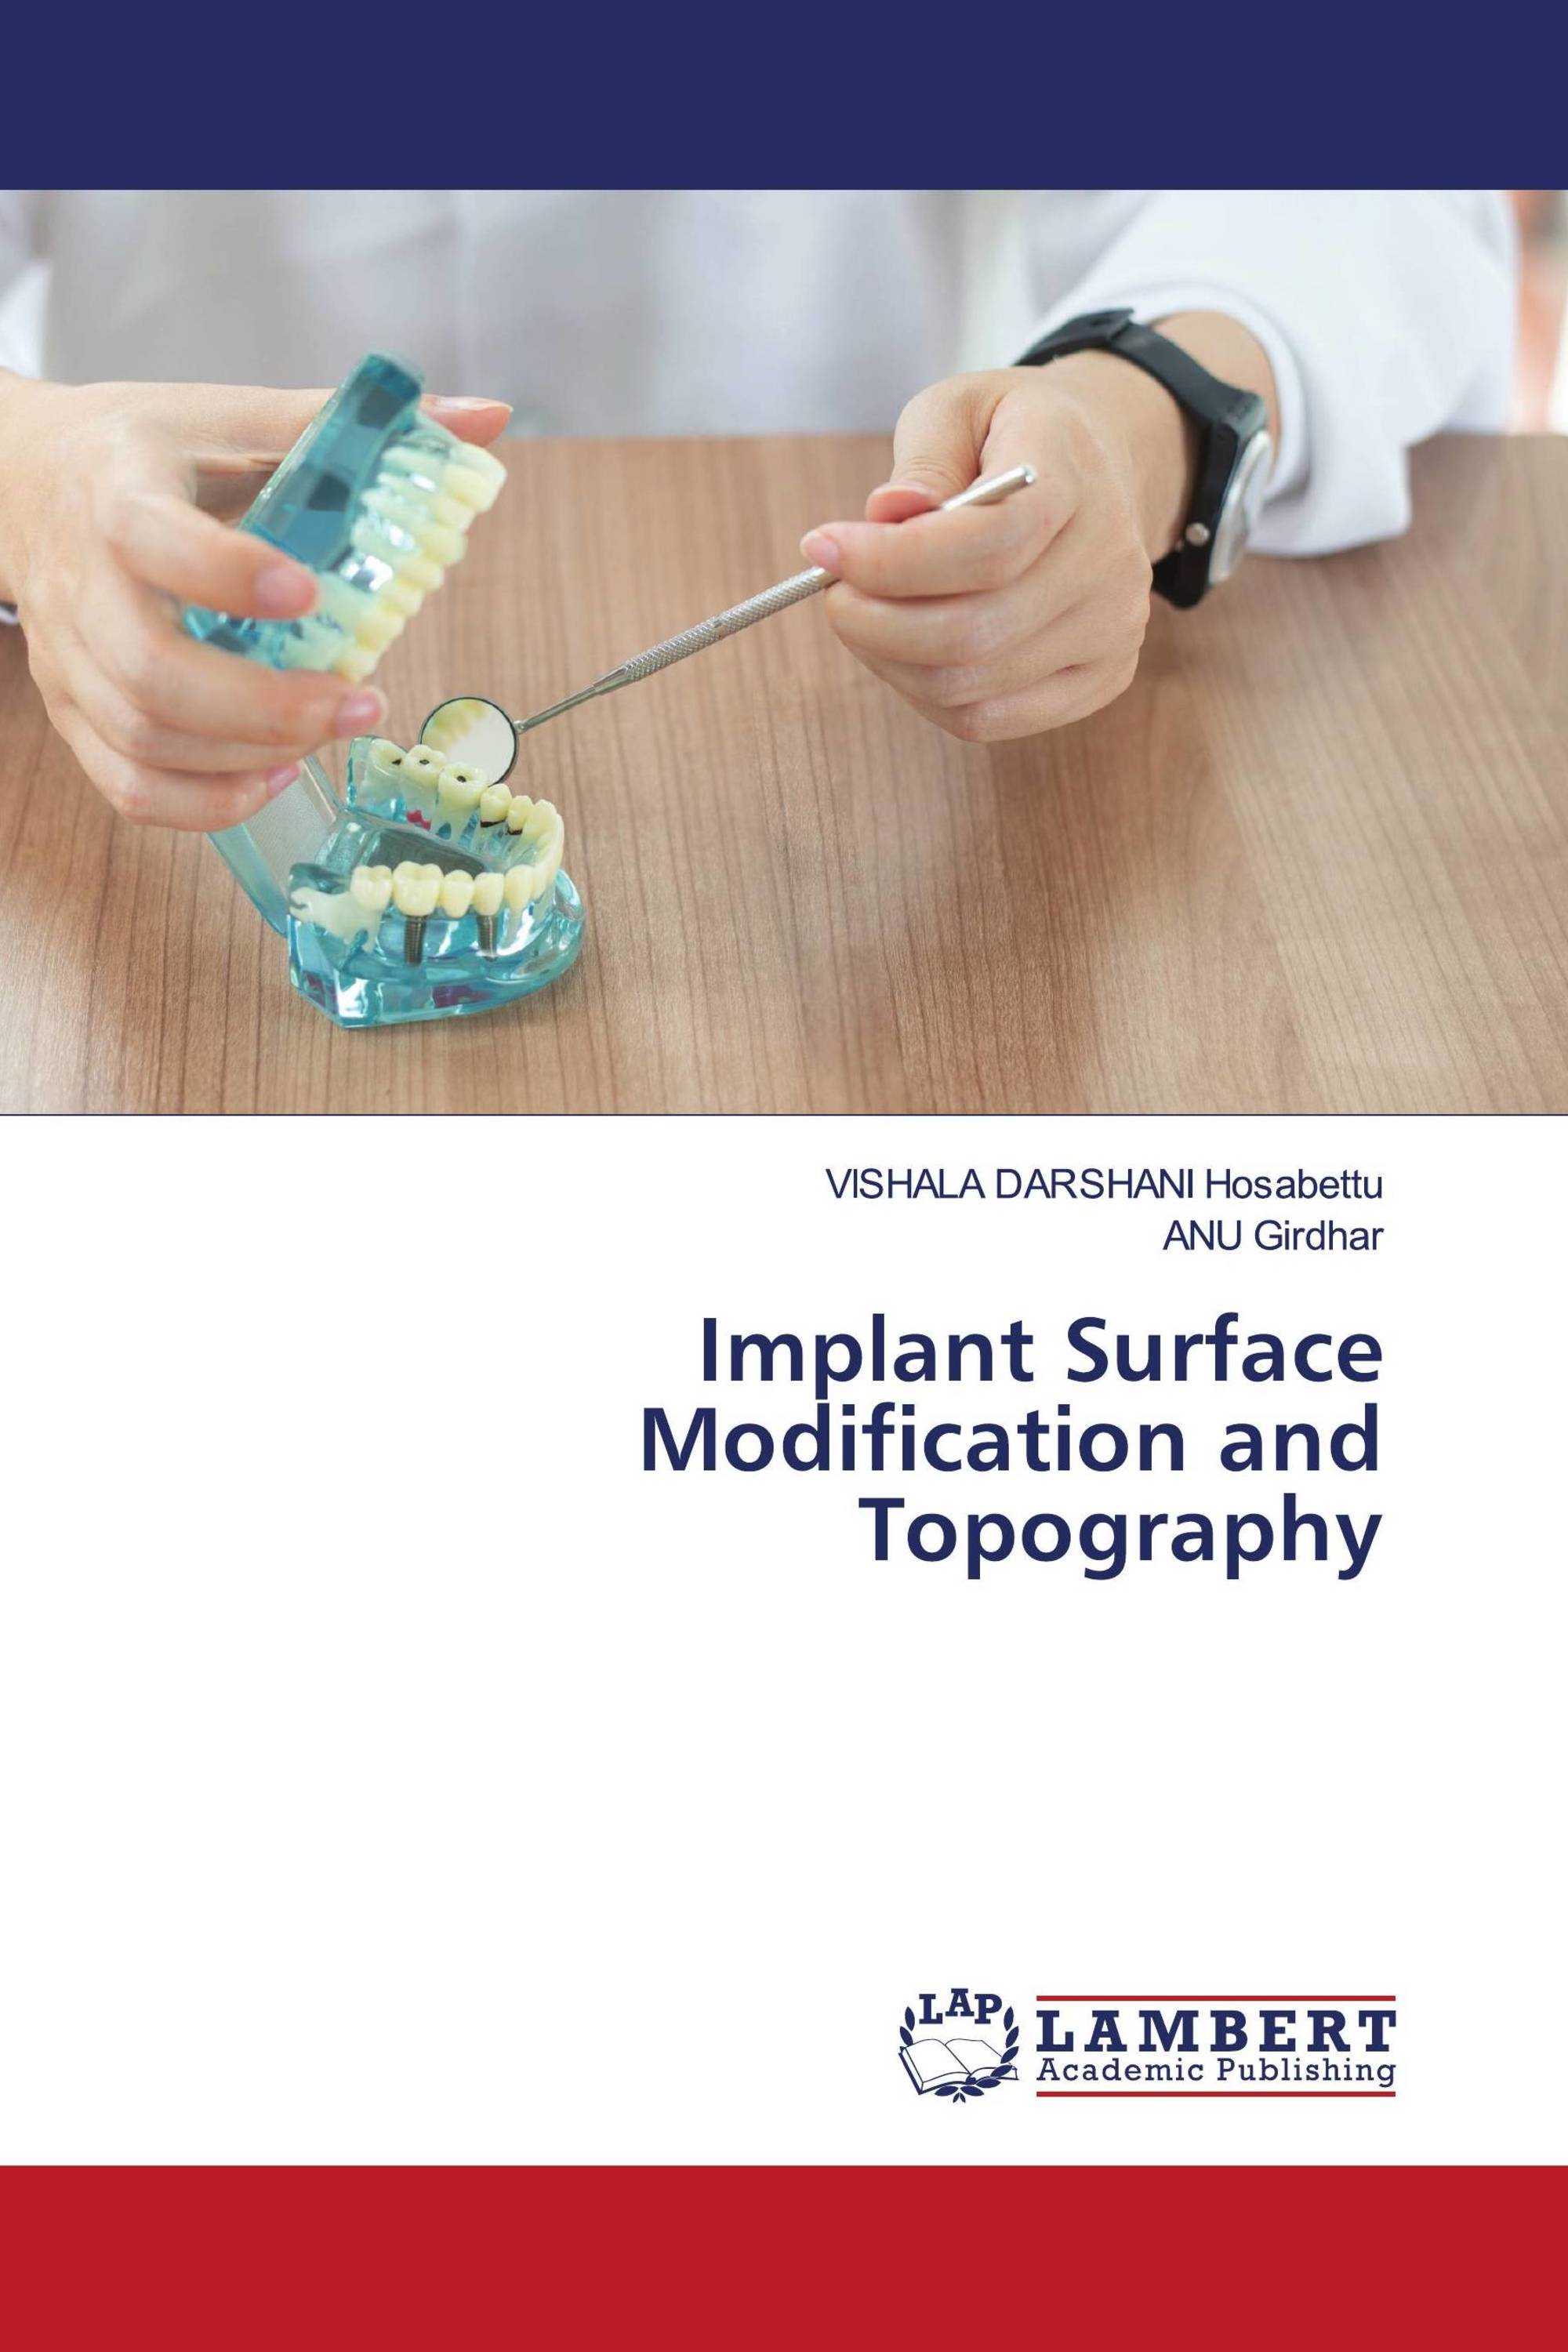 Implant Surface Modification and Topography